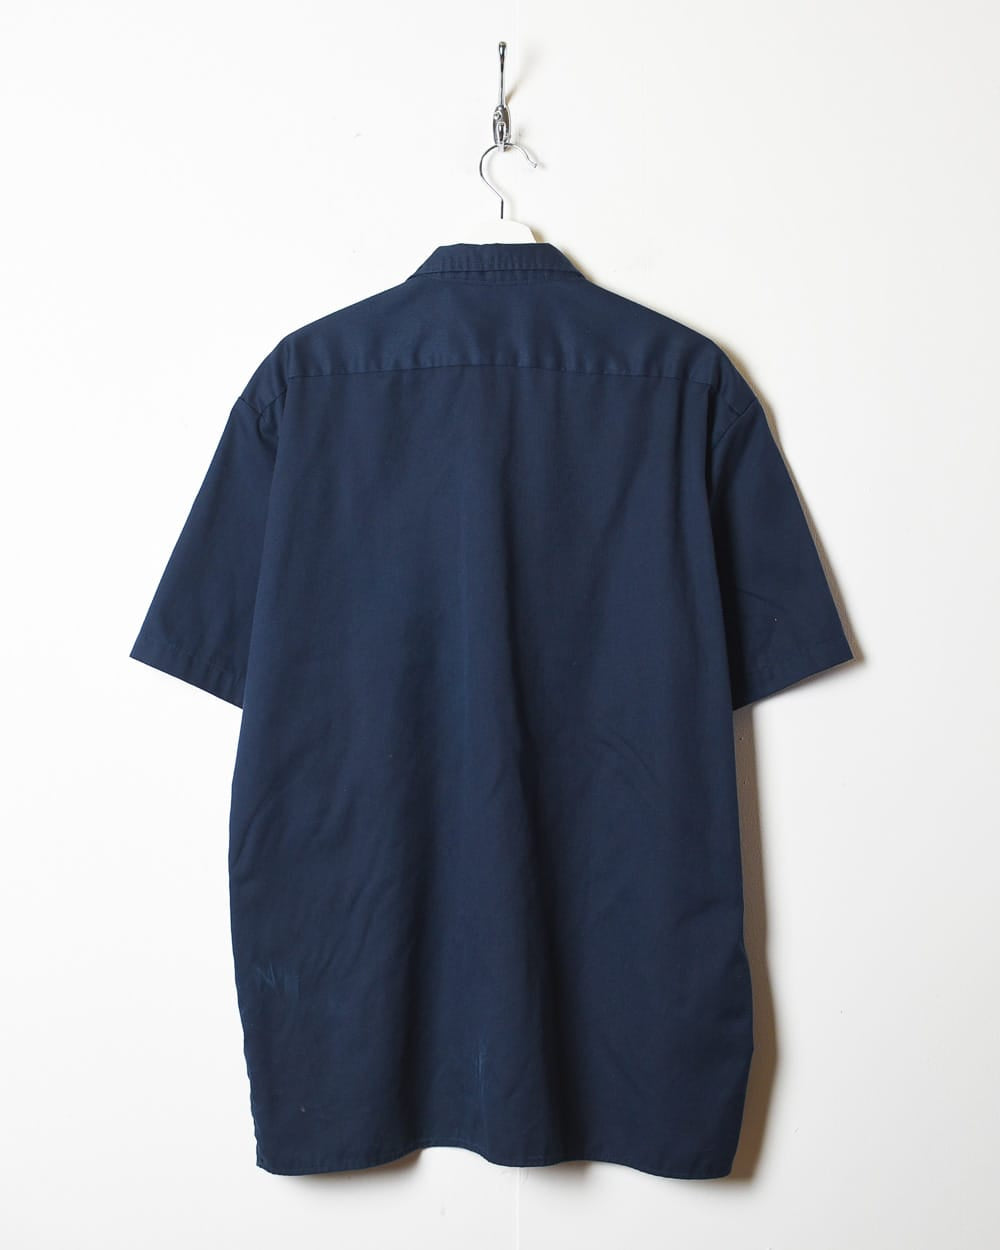 Navy Dickies Double Pocket Short Sleeved Shirt - Large